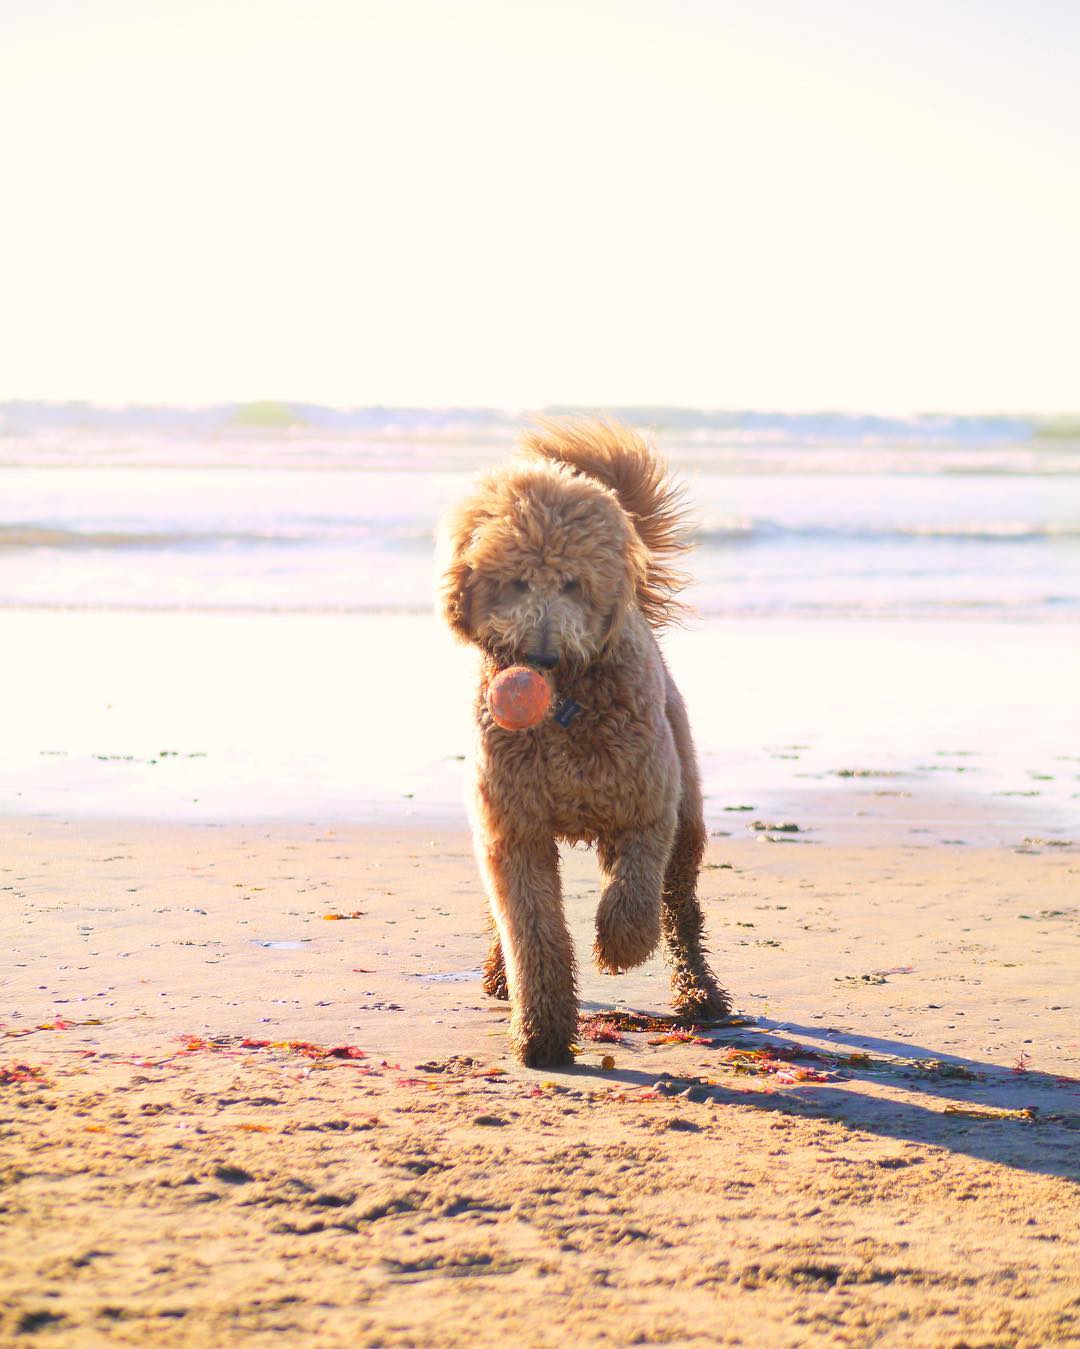 Golden Doodle dog plays with a ball on the beach. Photo by Instagram user @montanathedood